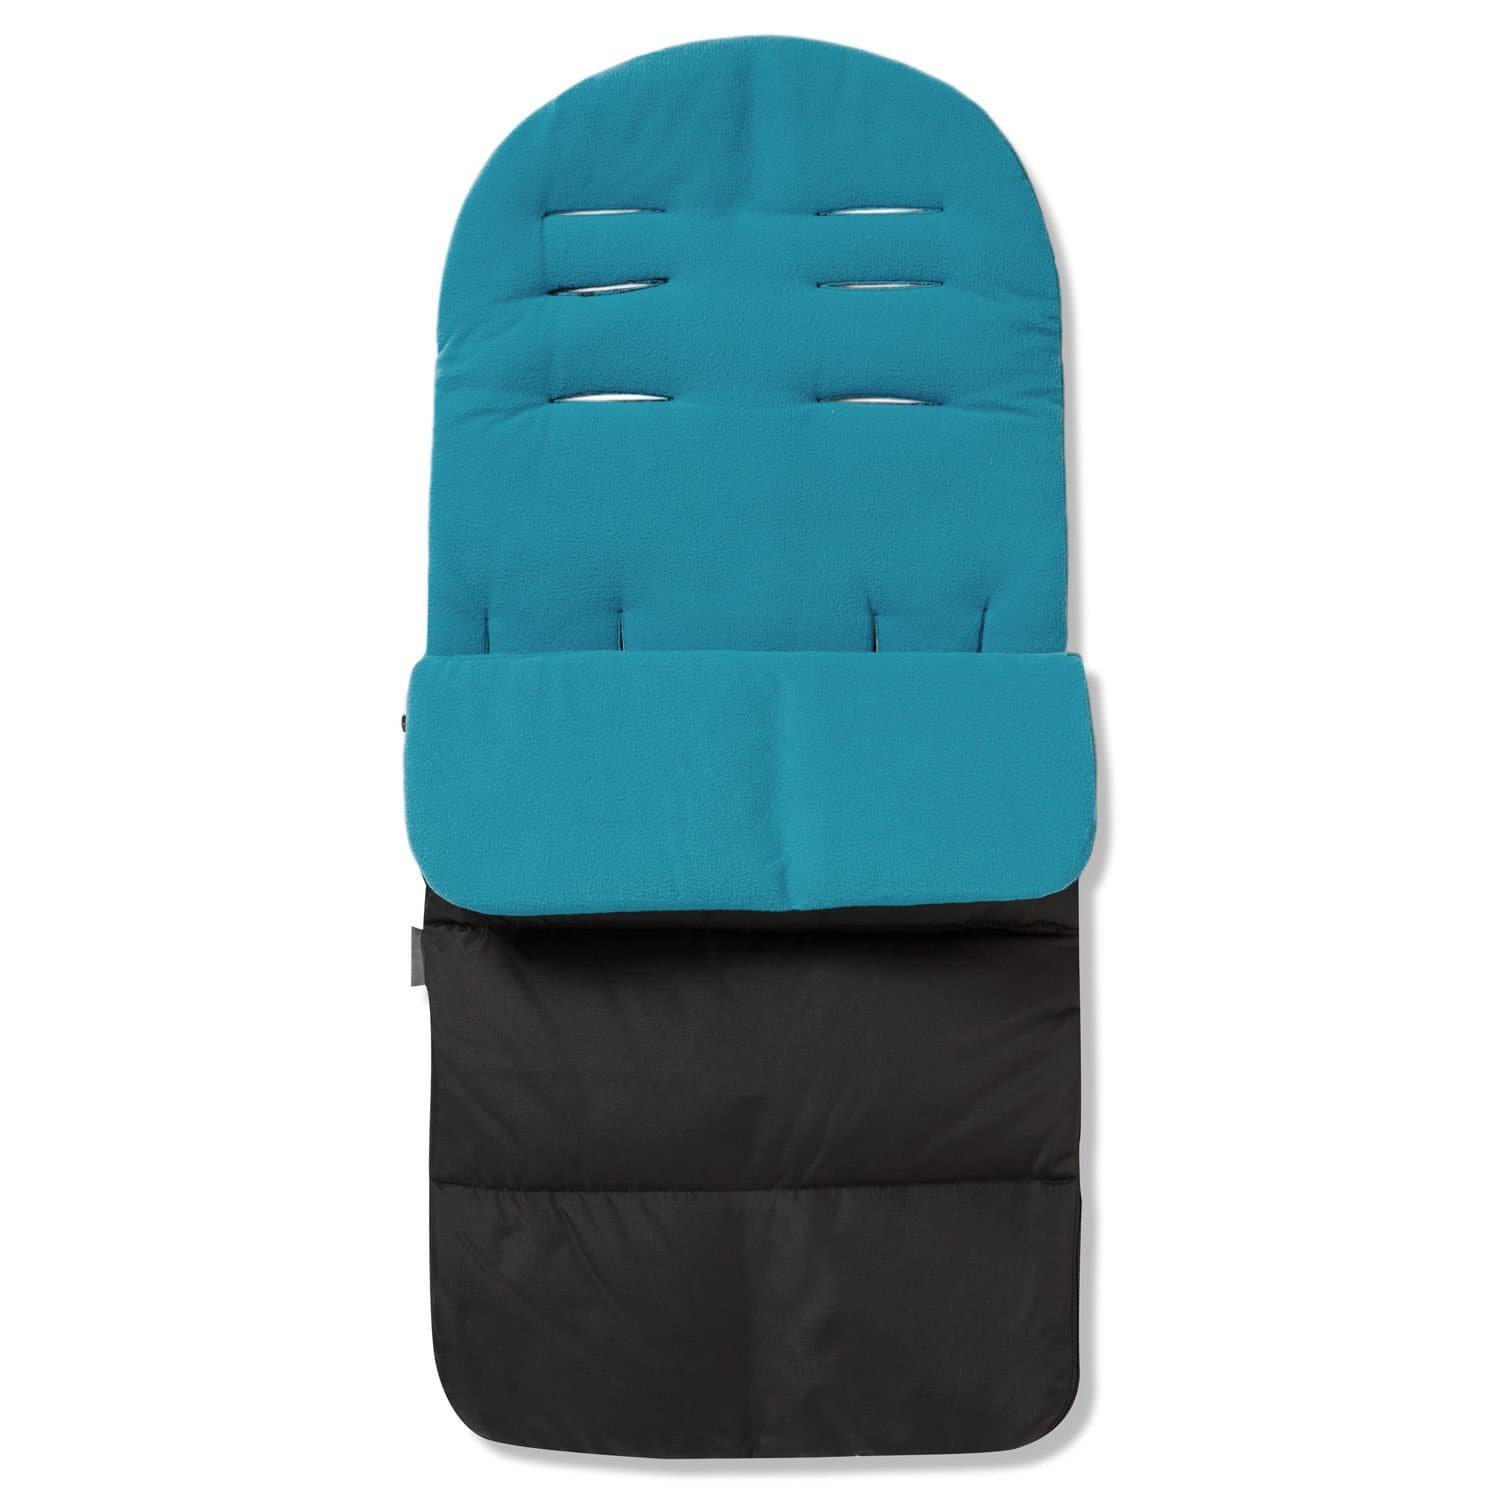 Premium Footmuff / Cosy Toes Compatible with Jane - Ocean Blue / Fits All Models | For Your Little One